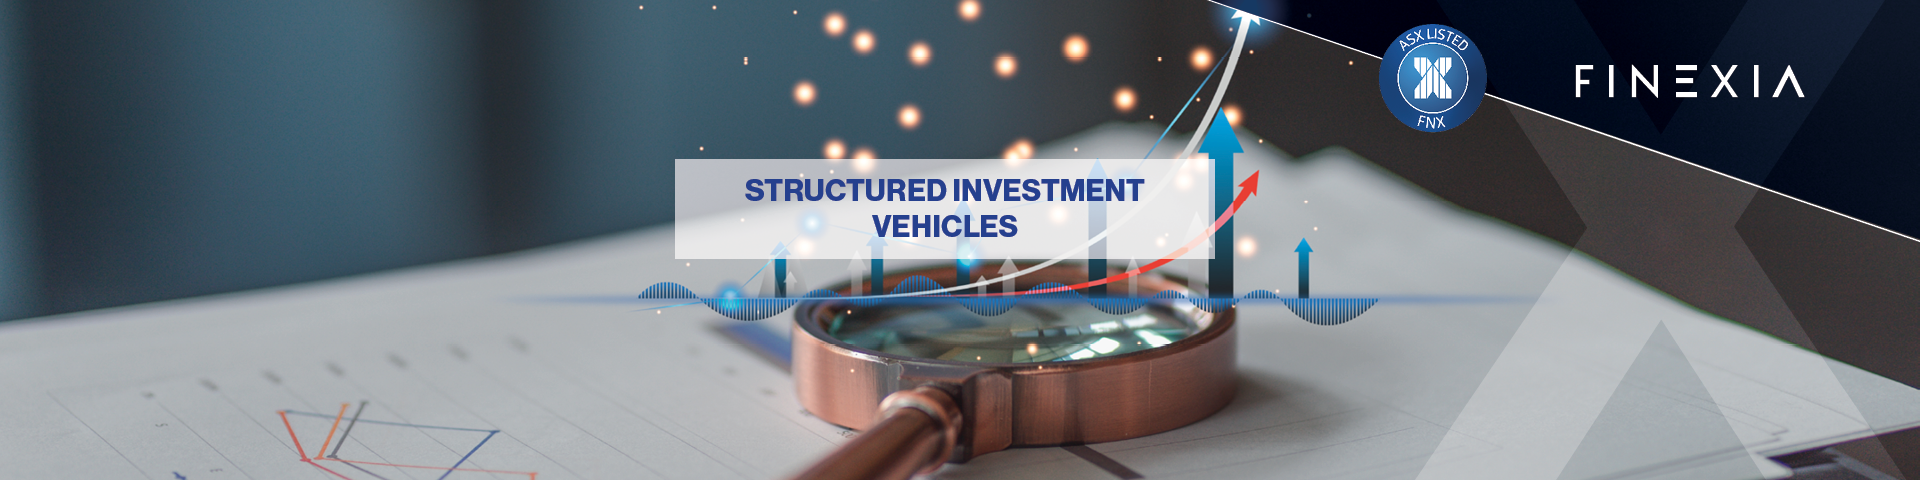 Structured Investment Vehicles